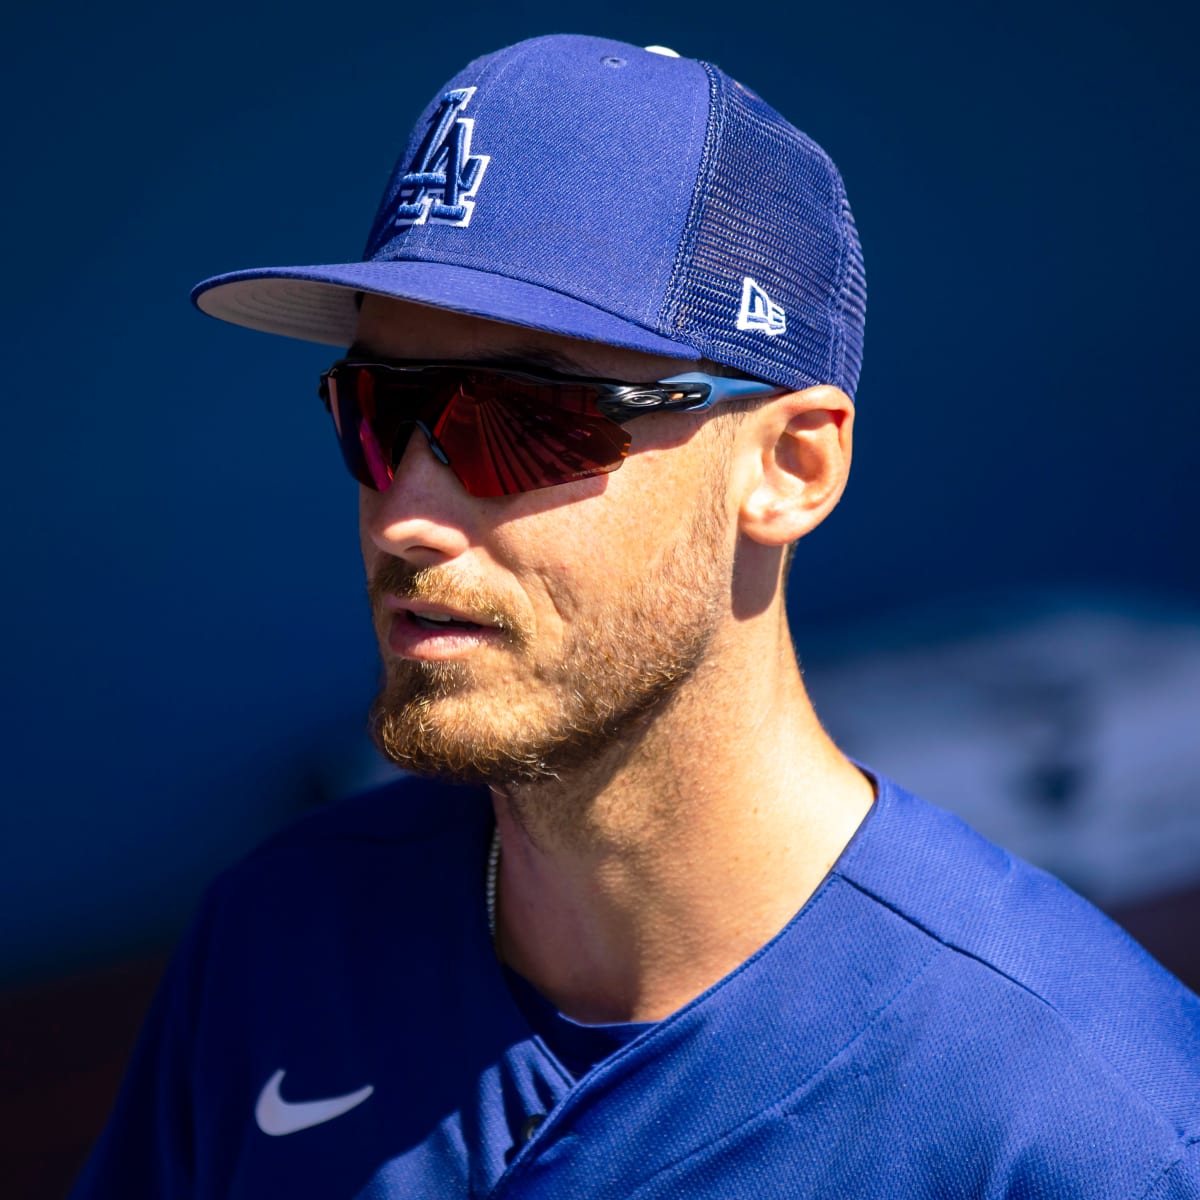 Dodgers news: Cody Bellinger not down about spring training woes - Sports  Illustrated